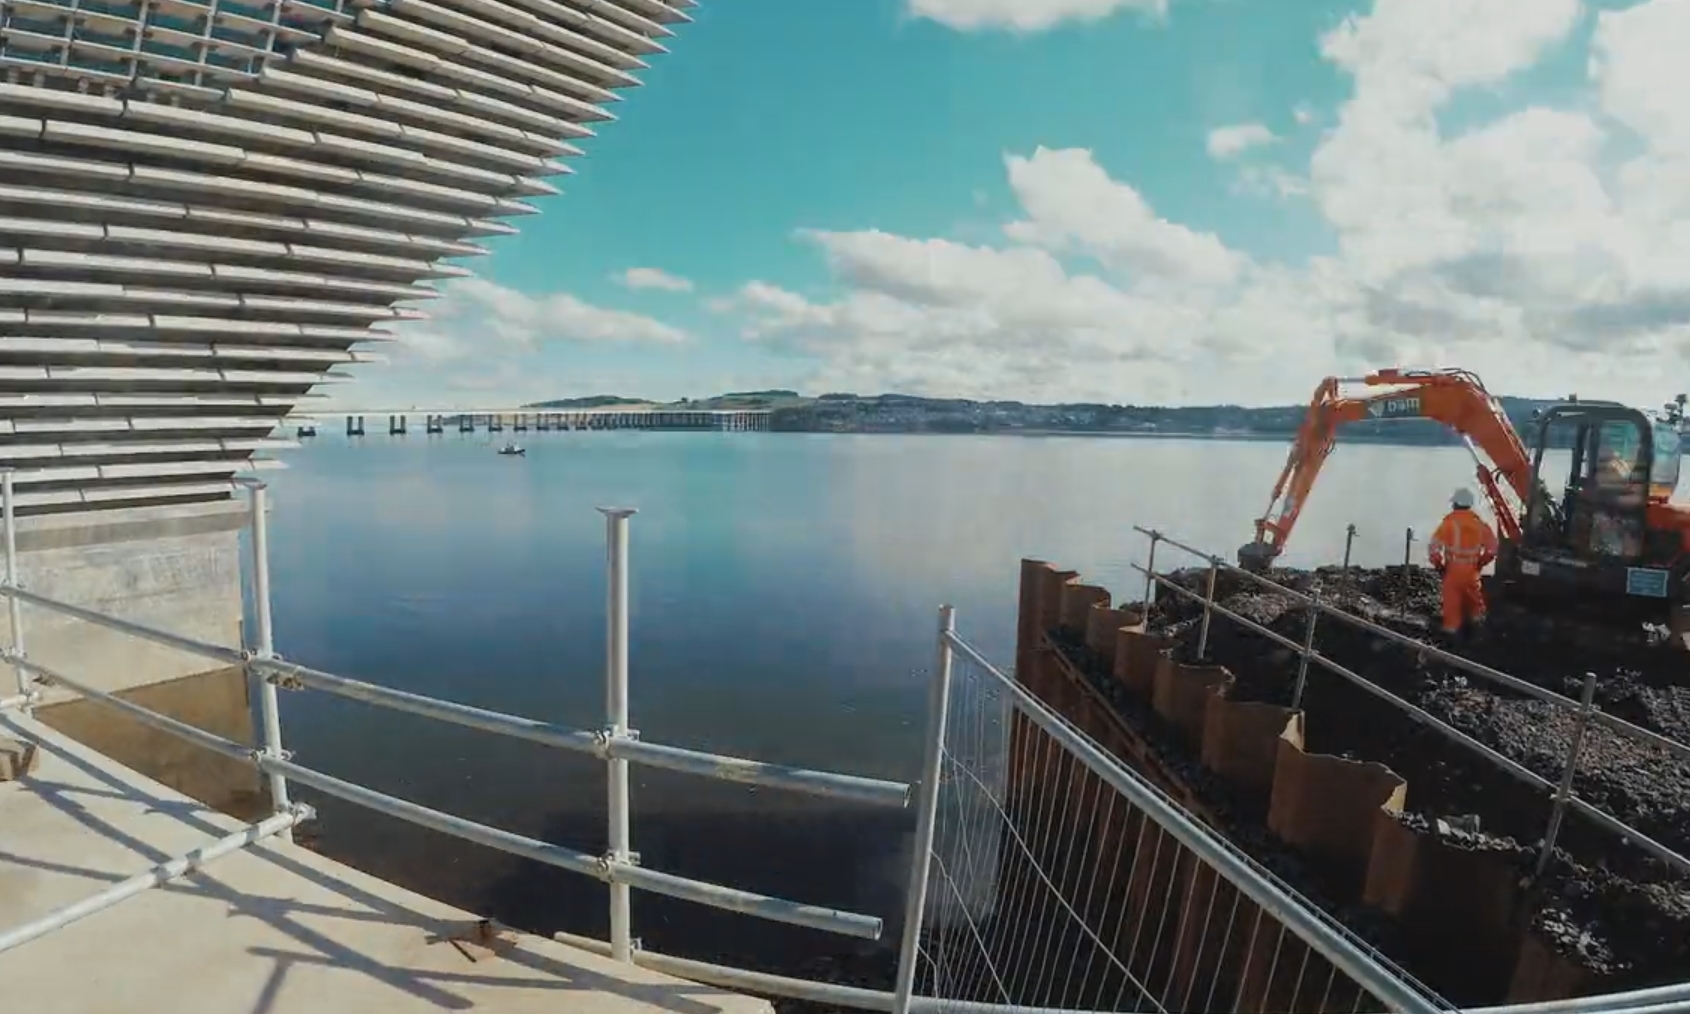 The V&A Dundee's cofferdam is removed.